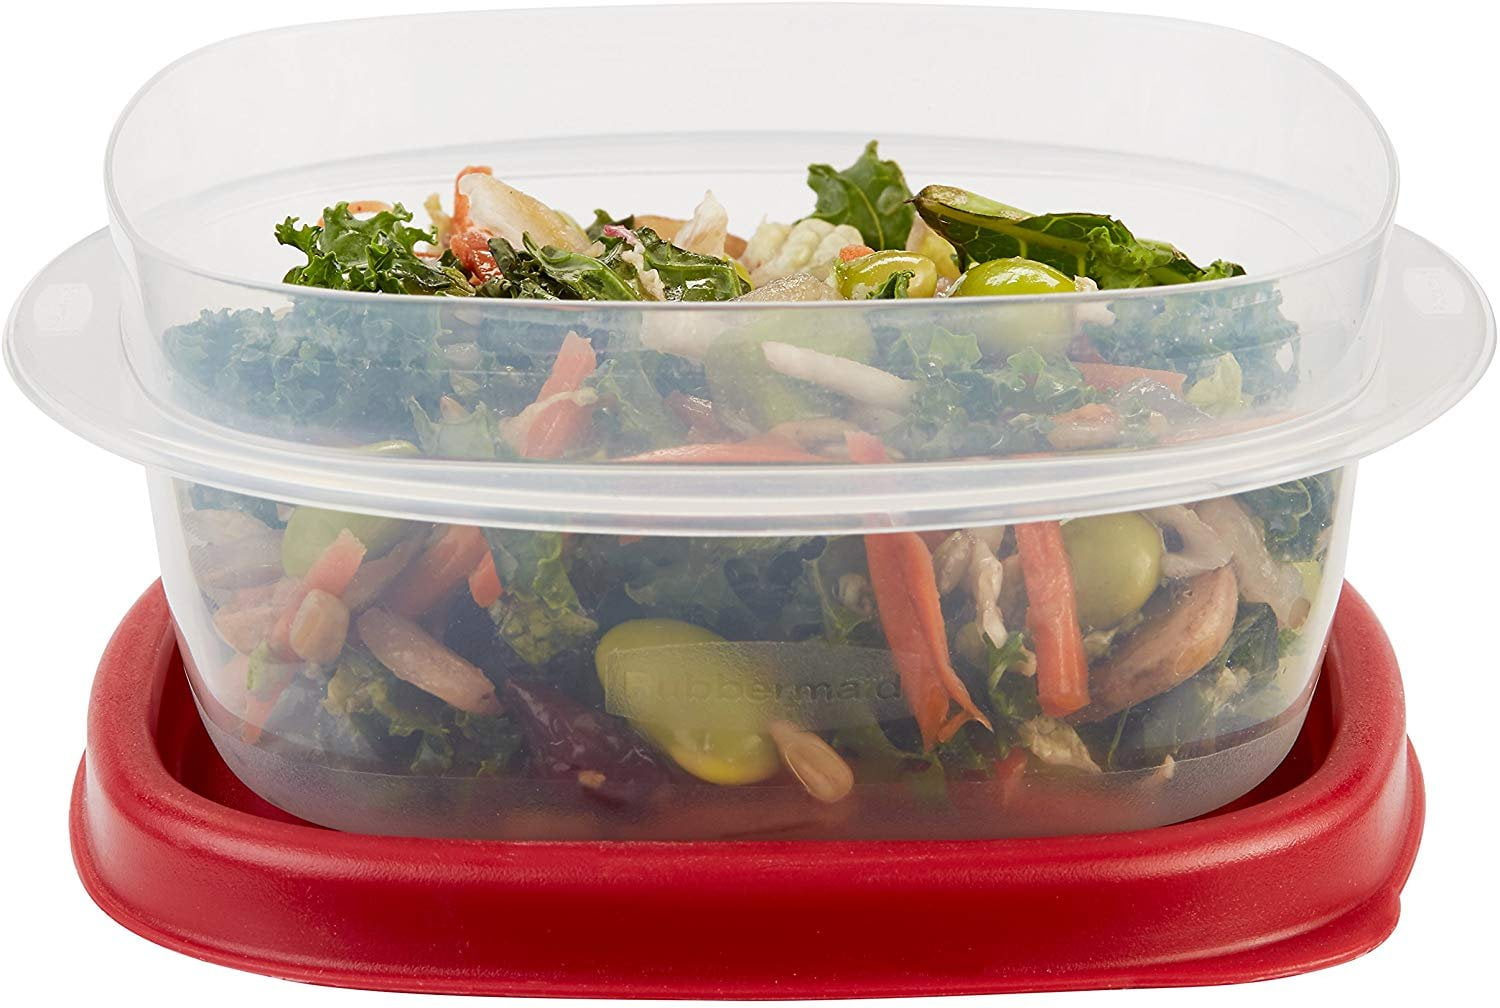 Rubbermaid® Rectangle Food Storage Container with Easy Find Lids, 8.5 c -  Kroger